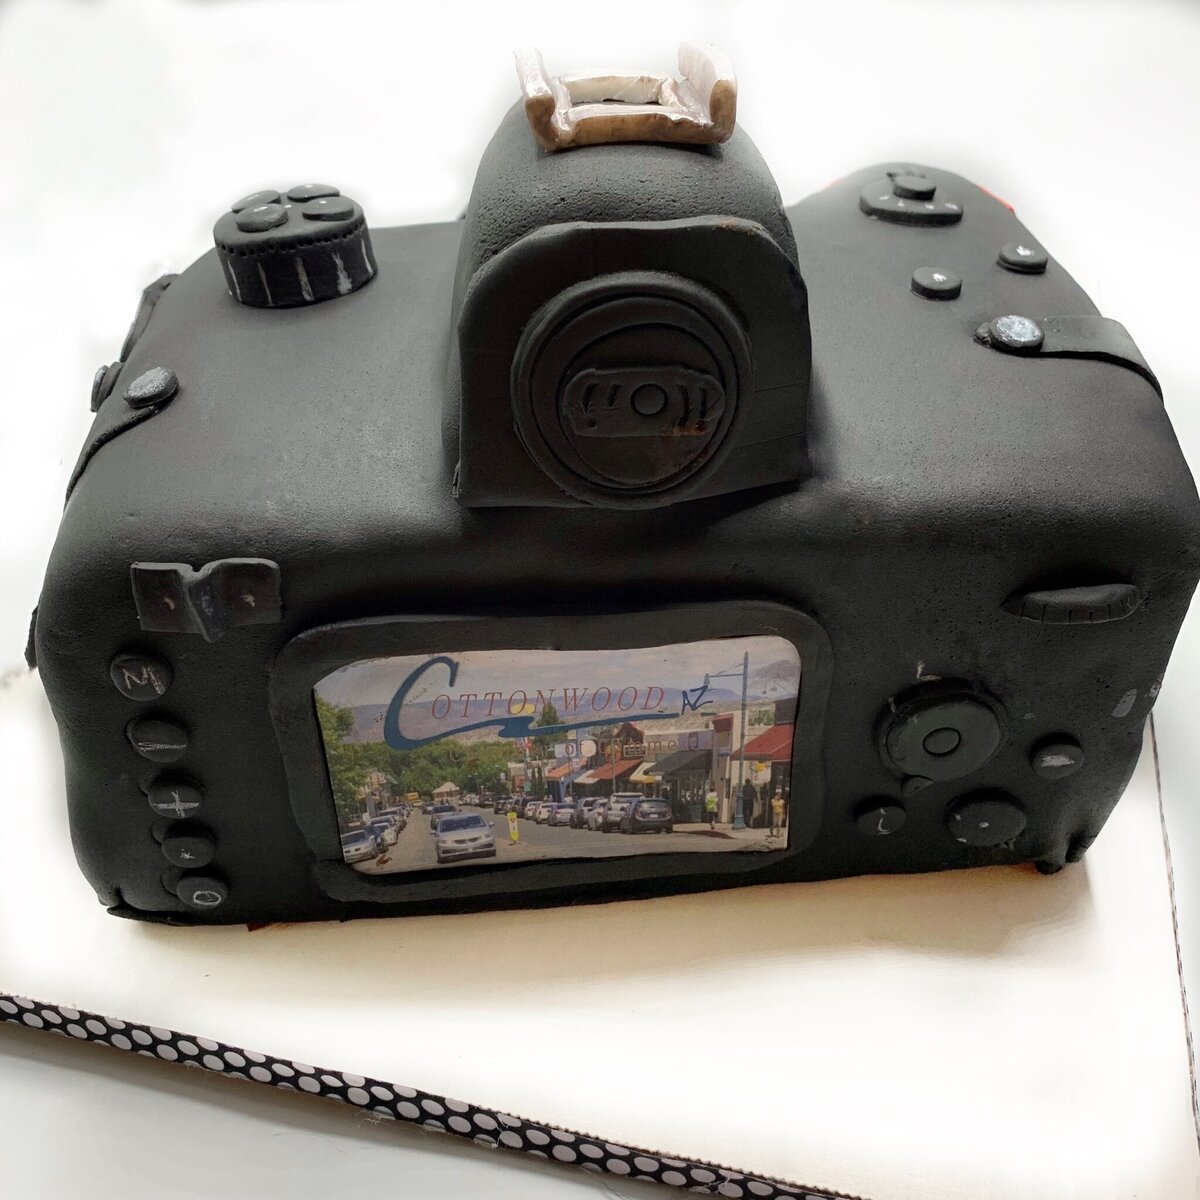 SLR camera cake back view with view finder image